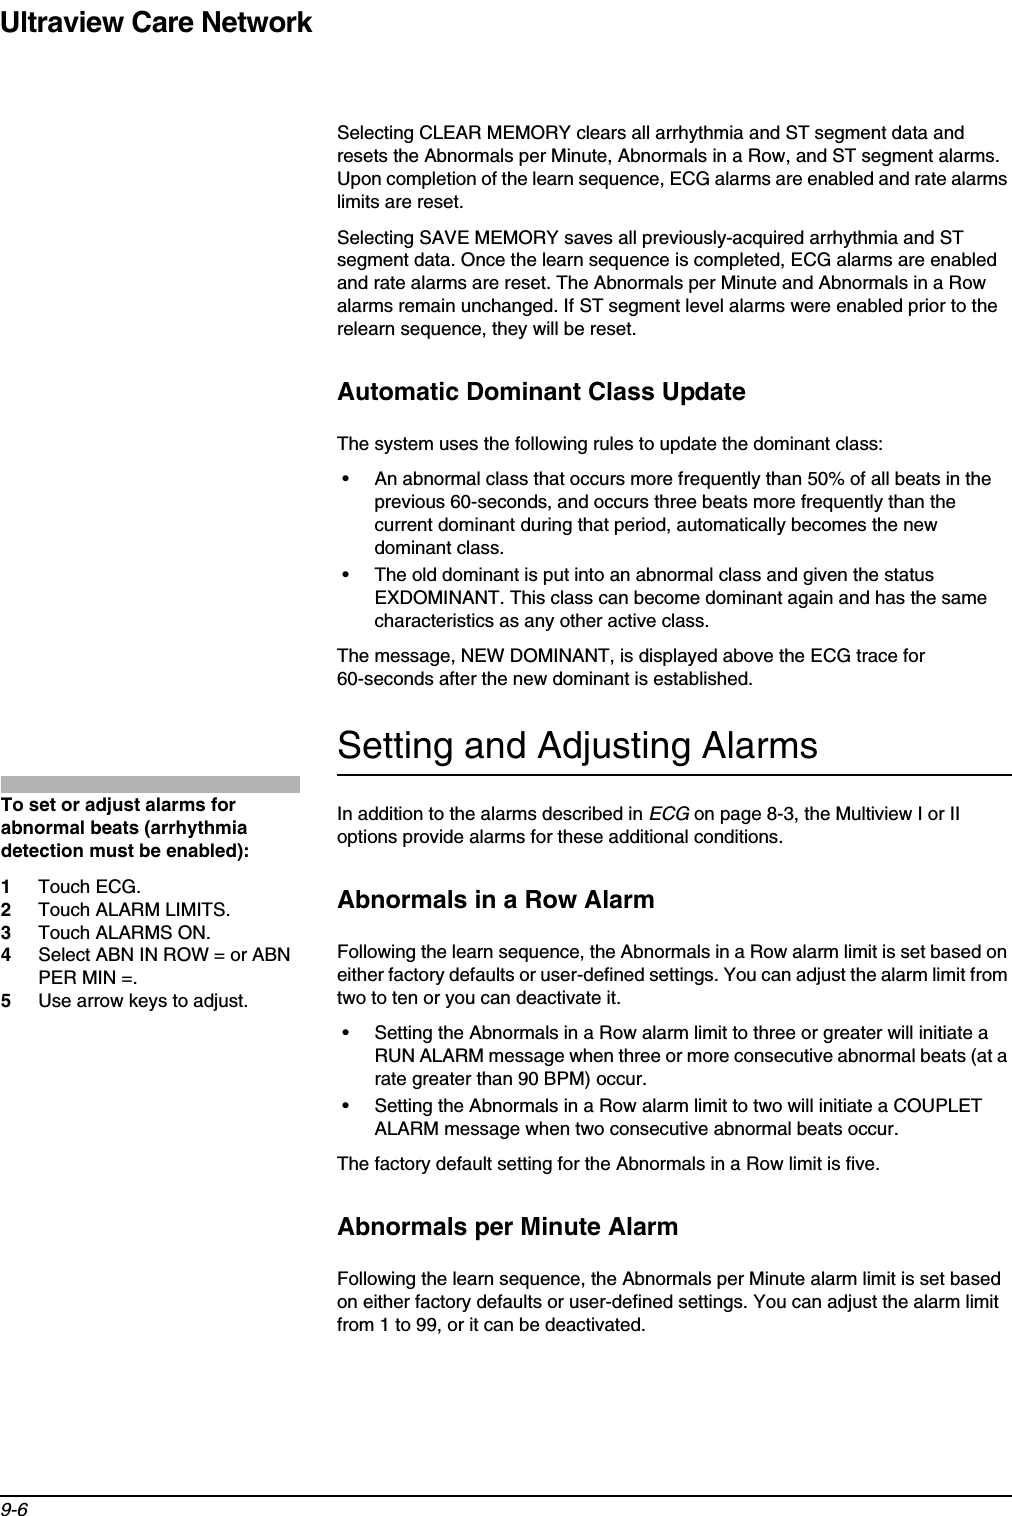 Ultraview Care Network9-6Selecting CLEAR MEMORY clears all arrhythmia and ST segment data and resets the Abnormals per Minute, Abnormals in a Row, and ST segment alarms. Upon completion of the learn sequence, ECG alarms are enabled and rate alarms limits are reset.Selecting SAVE MEMORY saves all previously-acquired arrhythmia and ST segment data. Once the learn sequence is completed, ECG alarms are enabled and rate alarms are reset. The Abnormals per Minute and Abnormals in a Row alarms remain unchanged. If ST segment level alarms were enabled prior to the relearn sequence, they will be reset.Automatic Dominant Class UpdateThe system uses the following rules to update the dominant class:• An abnormal class that occurs more frequently than 50% of all beats in the previous 60-seconds, and occurs three beats more frequently than the current dominant during that period, automatically becomes the new dominant class.• The old dominant is put into an abnormal class and given the status EXDOMINANT. This class can become dominant again and has the same characteristics as any other active class.The message, NEW DOMINANT, is displayed above the ECG trace for 60-seconds after the new dominant is established.Setting and Adjusting AlarmsIn addition to the alarms described in ECG on page 8-3, the Multiview I or II options provide alarms for these additional conditions.Abnormals in a Row AlarmFollowing the learn sequence, the Abnormals in a Row alarm limit is set based on either factory defaults or user-defined settings. You can adjust the alarm limit from two to ten or you can deactivate it.• Setting the Abnormals in a Row alarm limit to three or greater will initiate a RUN ALARM message when three or more consecutive abnormal beats (at a rate greater than 90 BPM) occur.• Setting the Abnormals in a Row alarm limit to two will initiate a COUPLET ALARM message when two consecutive abnormal beats occur.The factory default setting for the Abnormals in a Row limit is five.Abnormals per Minute AlarmFollowing the learn sequence, the Abnormals per Minute alarm limit is set based on either factory defaults or user-defined settings. You can adjust the alarm limit from 1 to 99, or it can be deactivated.To set or adjust alarms for abnormal beats (arrhythmia detection must be enabled):1Touch ECG.2Touch ALARM LIMITS.3Touch ALARMS ON.4Select ABN IN ROW = or ABN PER MIN =.5Use arrow keys to adjust.